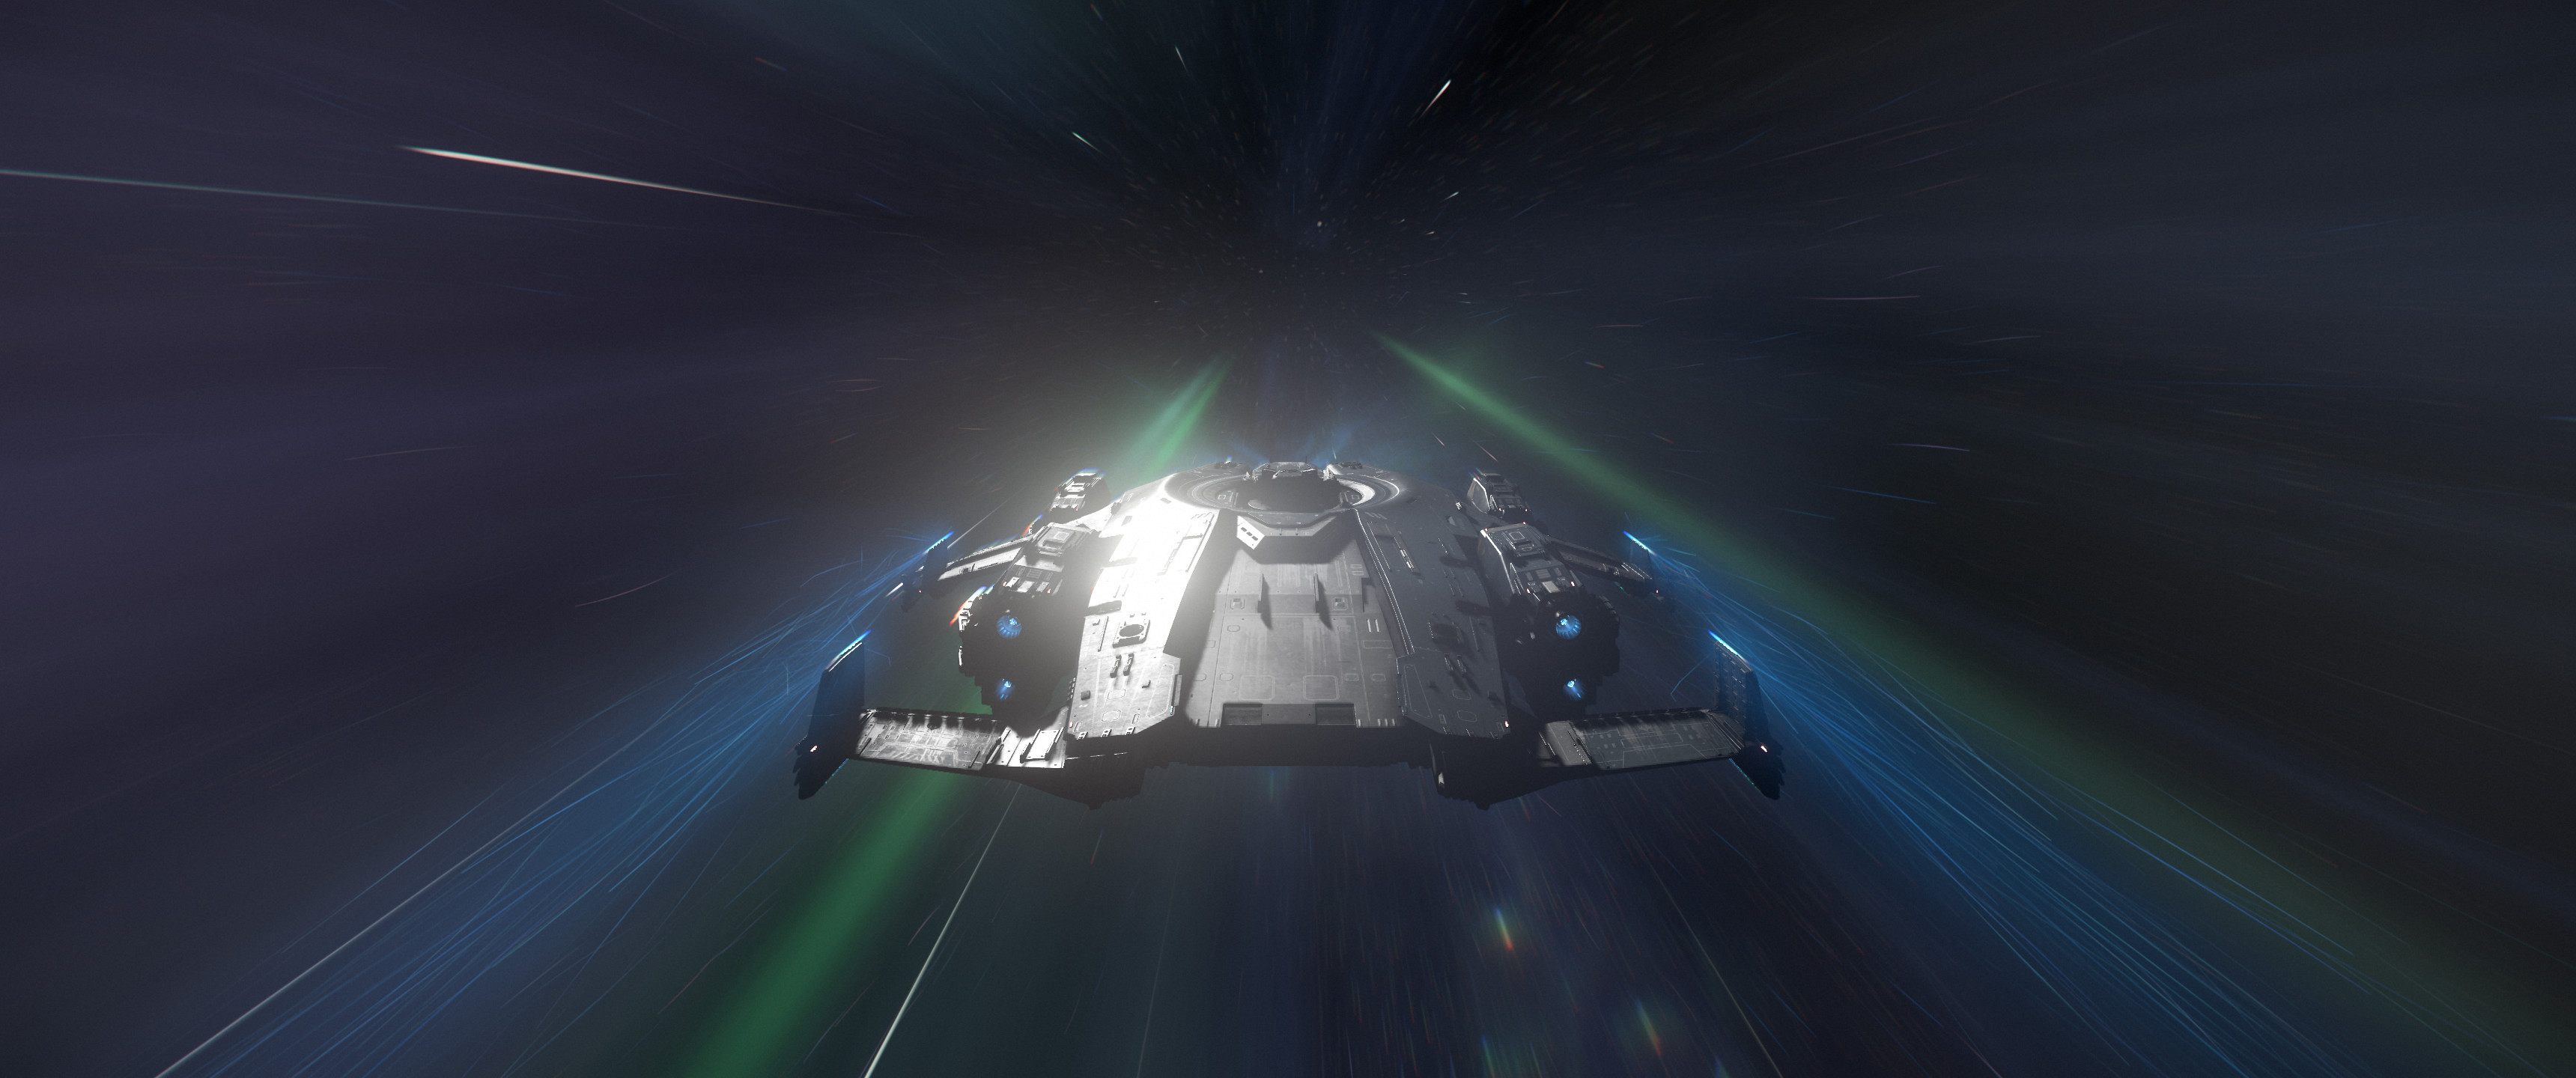 Rear view of a ship in the middle of a quantum jump, with a soft glare on its hull and streams of multi-colored light streaking around it